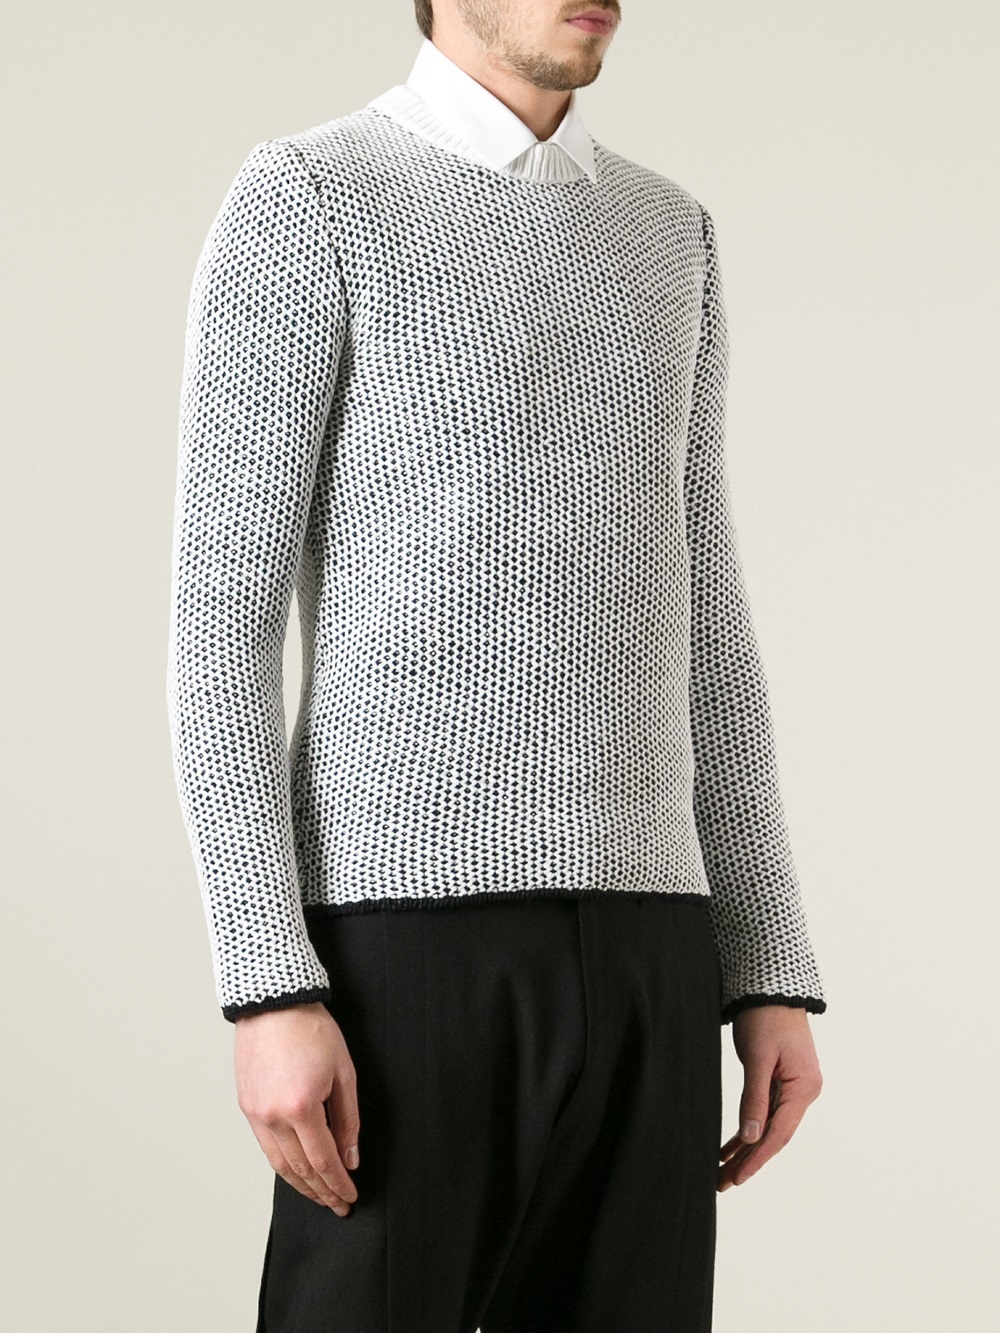 Balenciaga Honeycomb Knit Sweater in White for Men - Lyst